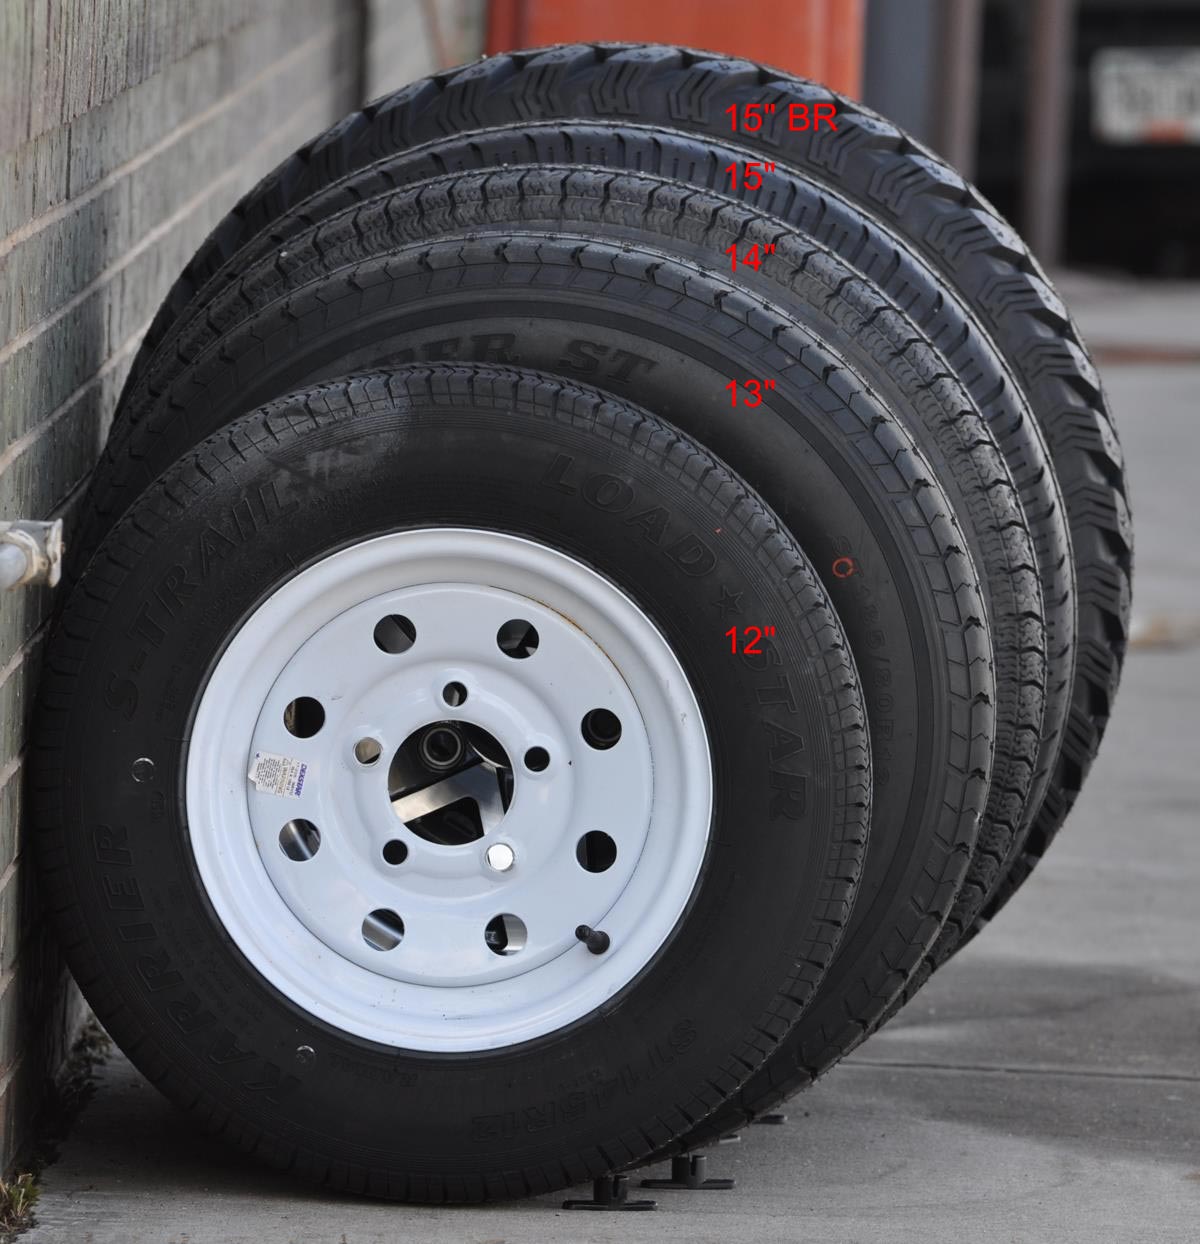 Travel Trailer Tire Size Chart